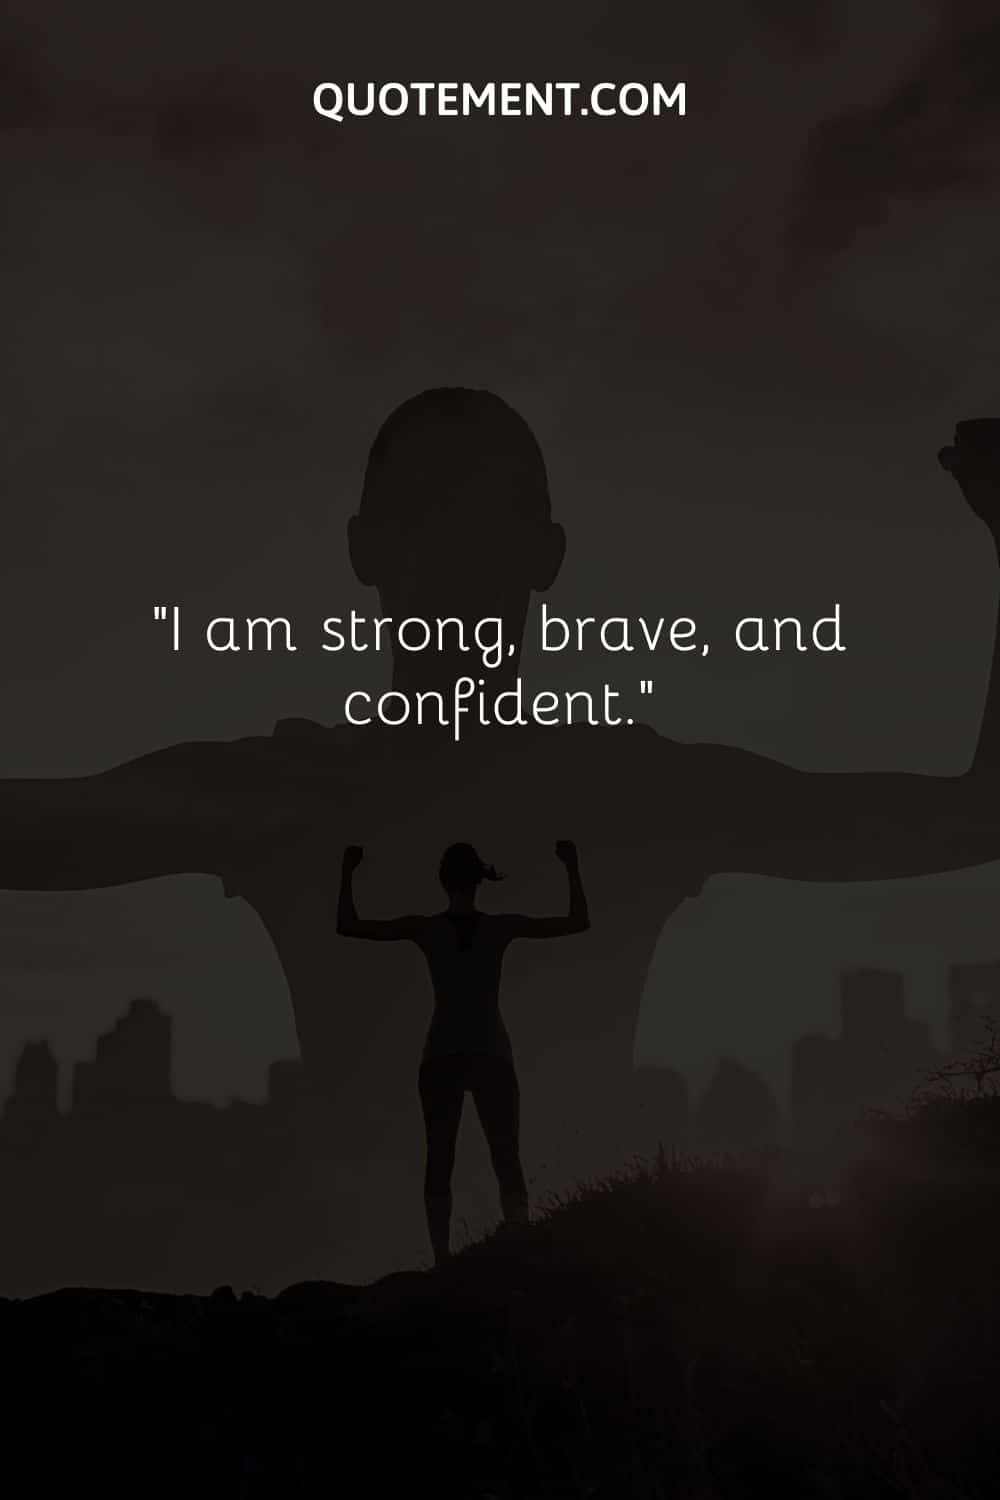 I am strong, brave, and confident